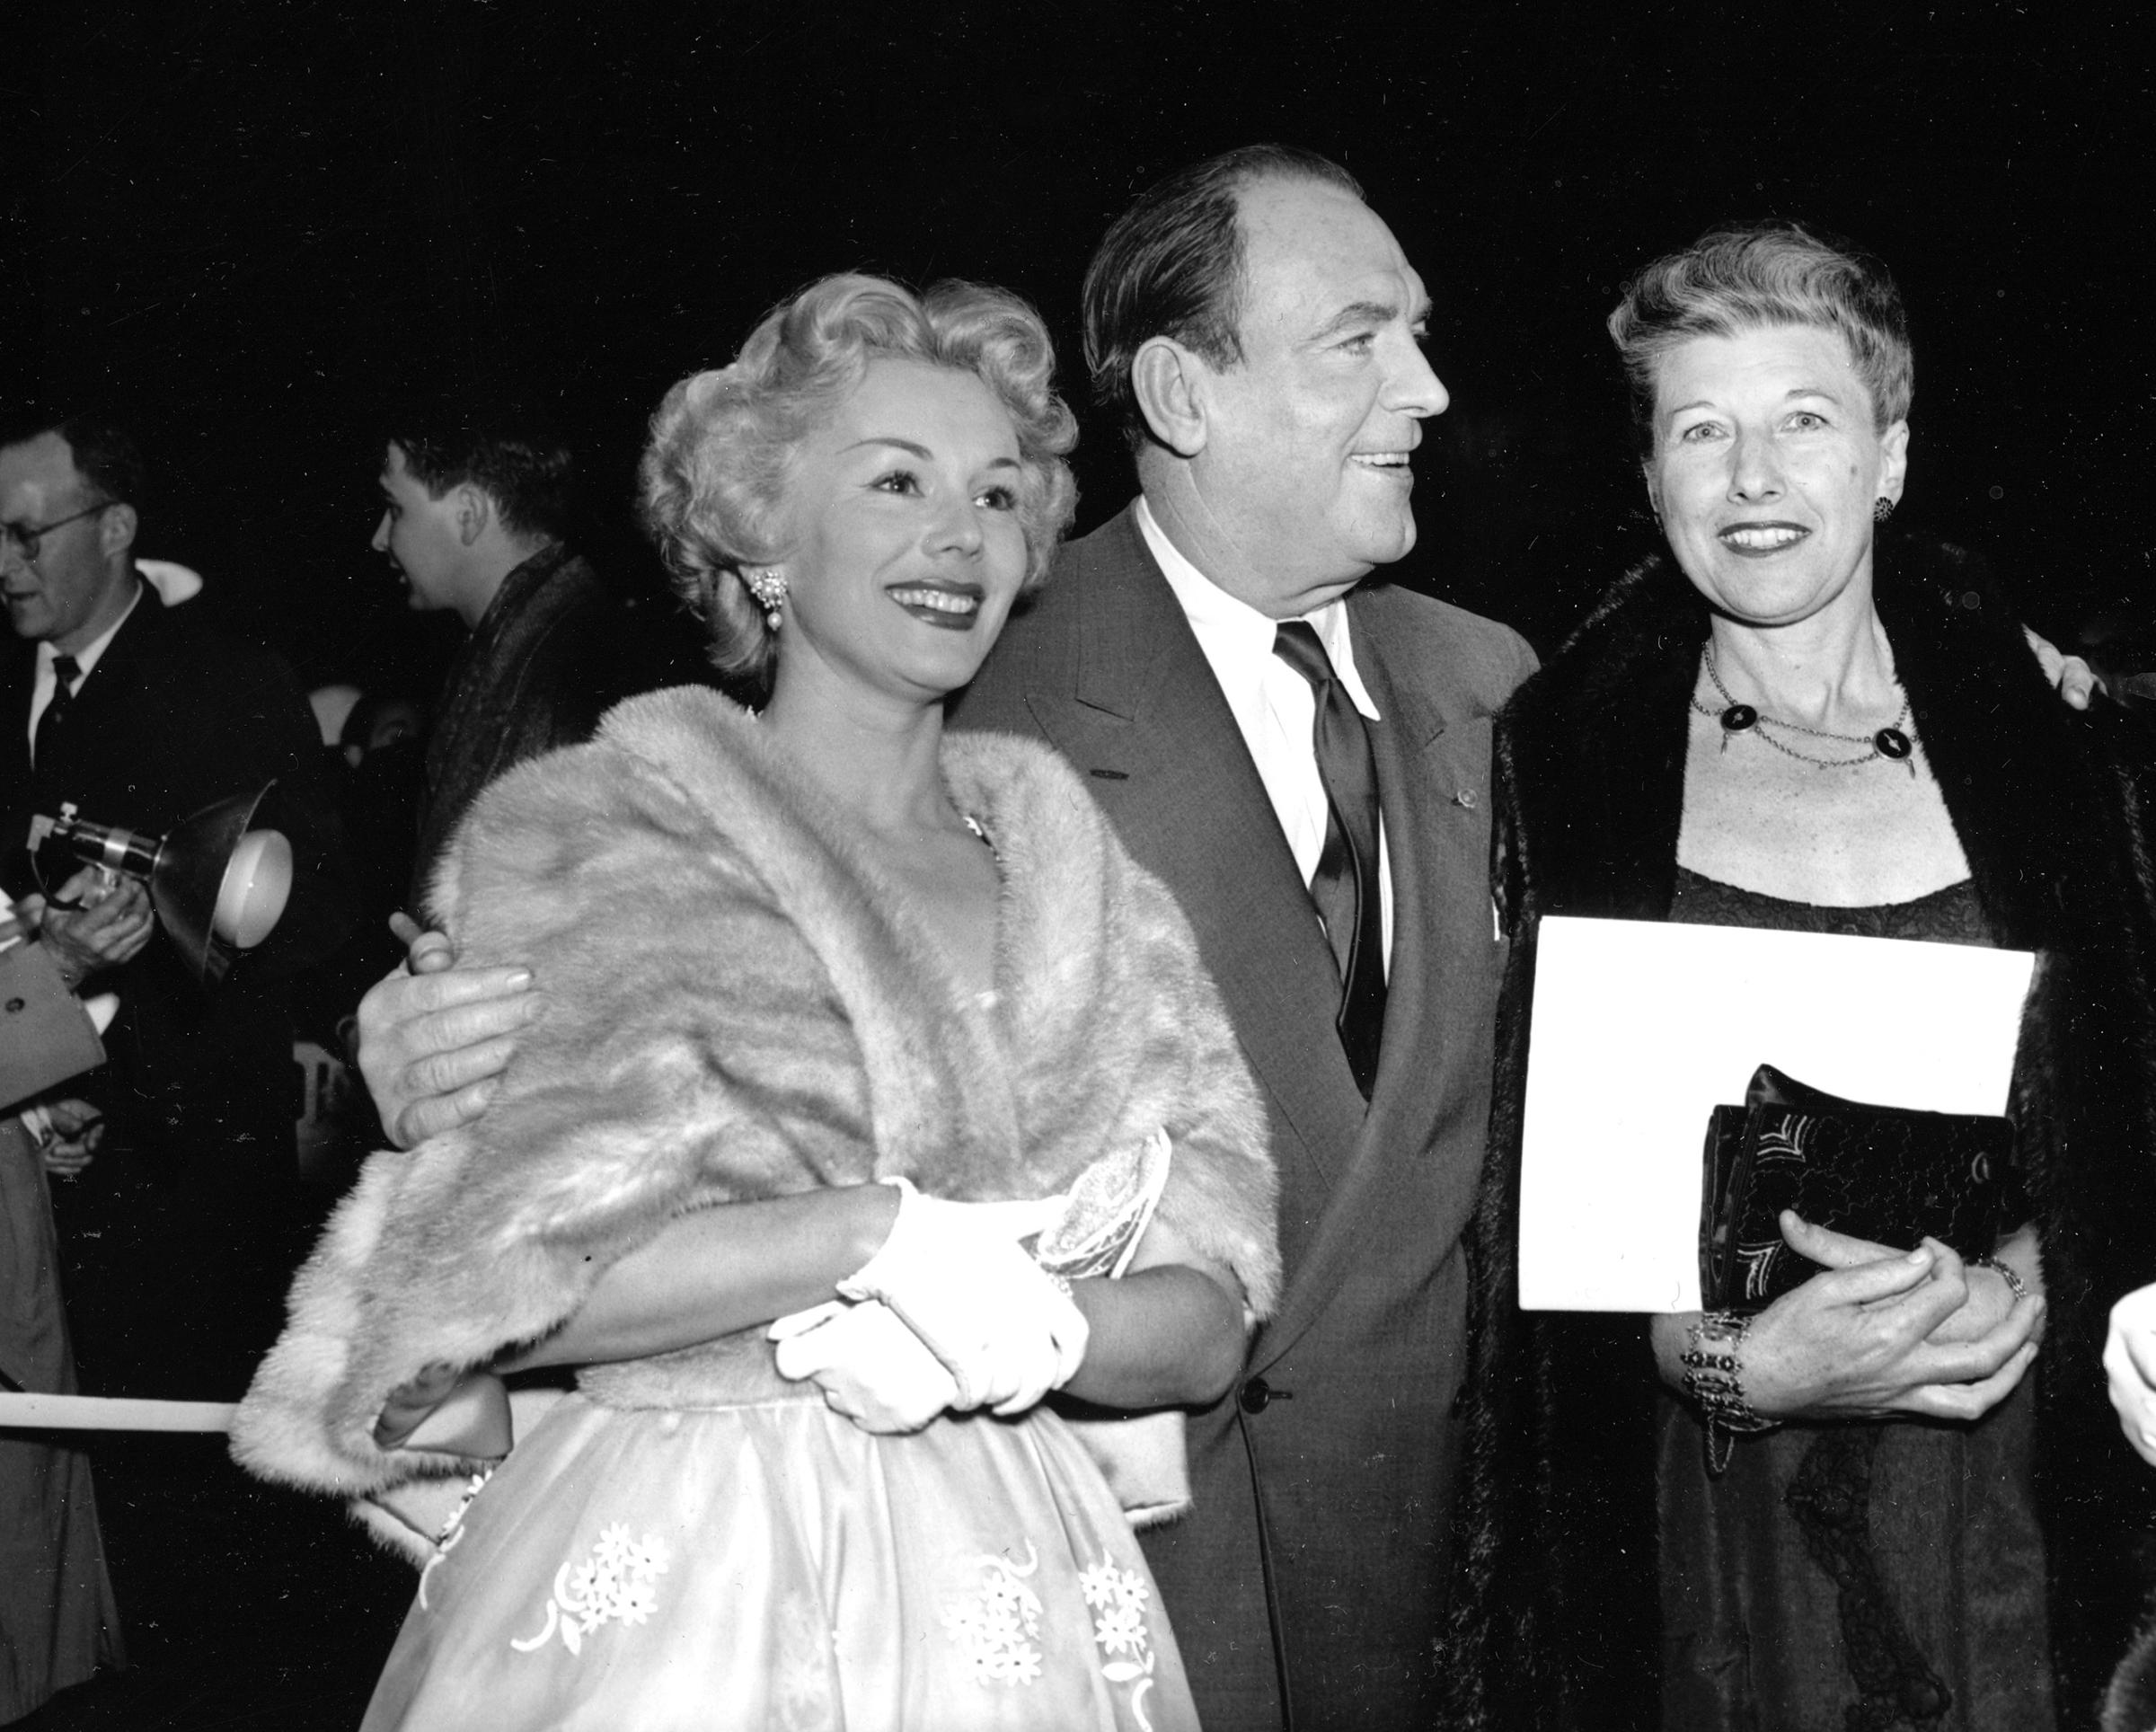 Eva Gabor, Pat O'Brien and Evelyn Karloff attend the eastern part of the telecast of the Academy Awards presentations in New York City, 1953.